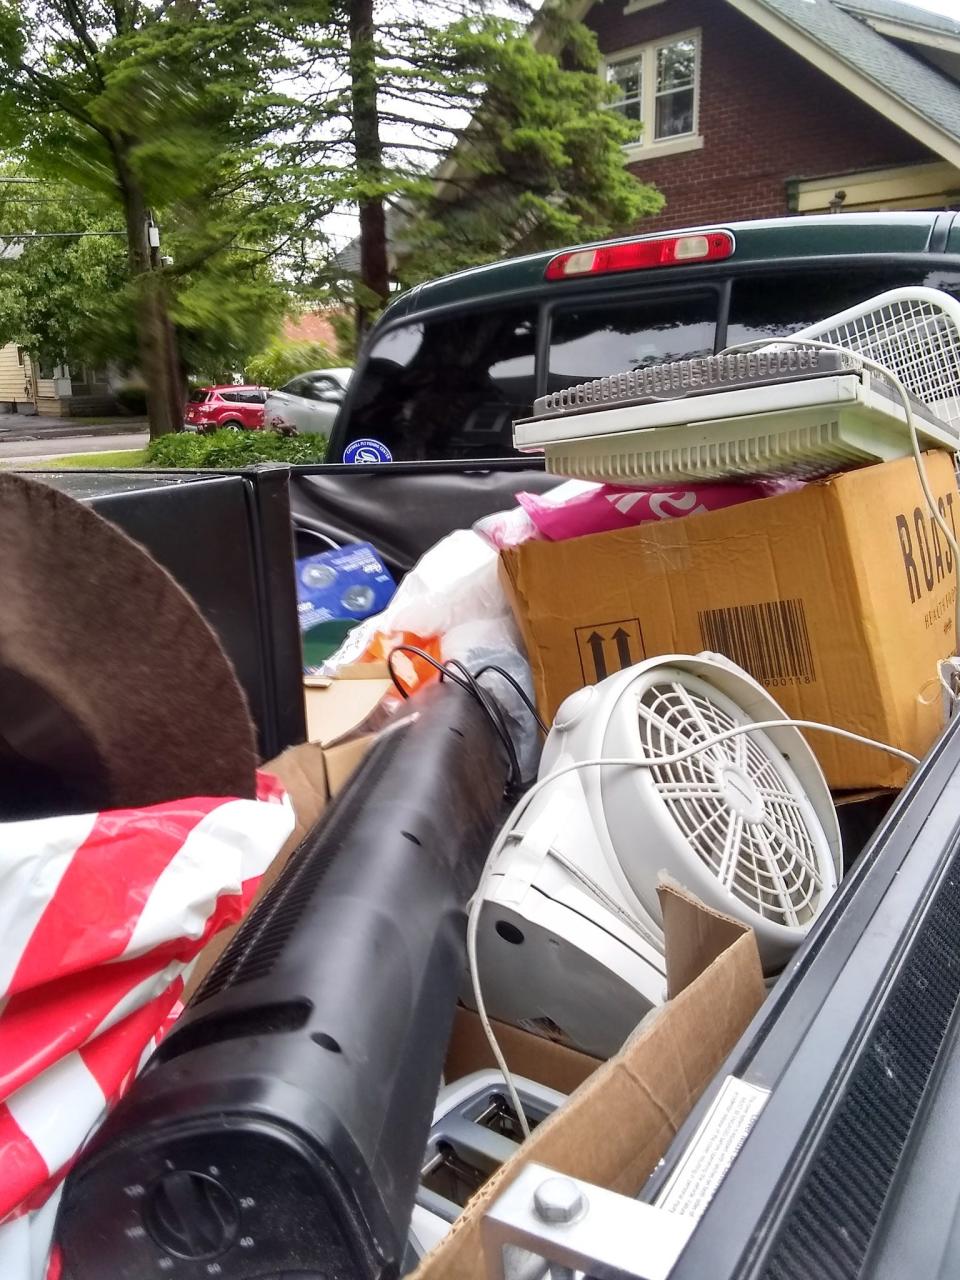 A truckload of donations from Binghamton University students made to the Binghamton Move Out Project. When students move out in May, they can donate items to the project. Items are donated to local organizations that can use them.